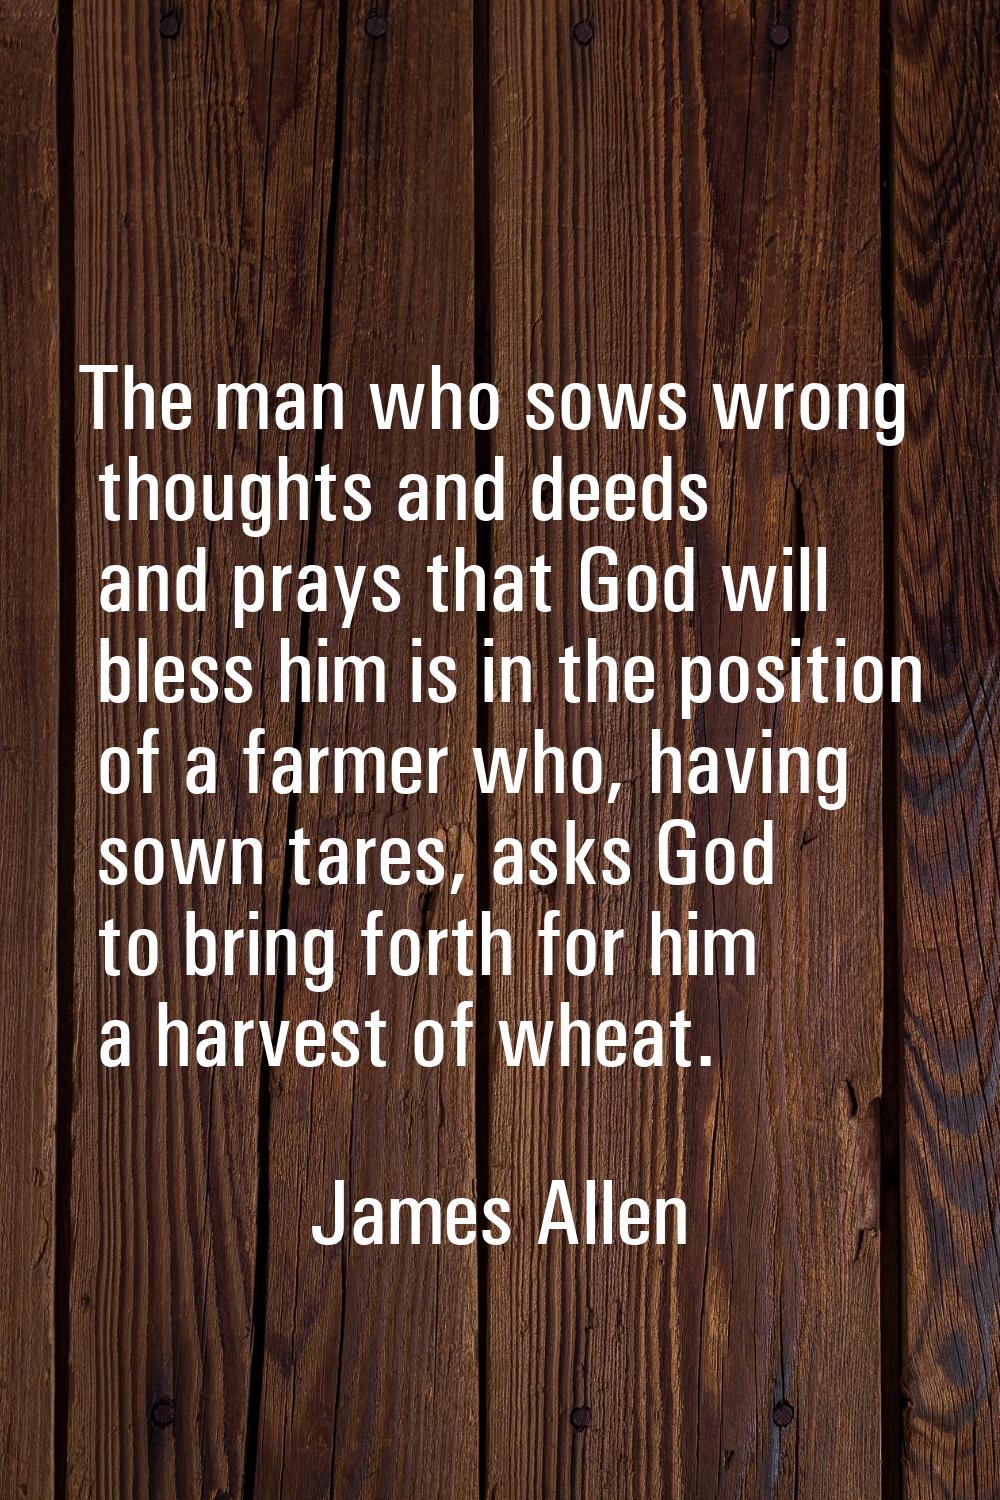 The man who sows wrong thoughts and deeds and prays that God will bless him is in the position of a